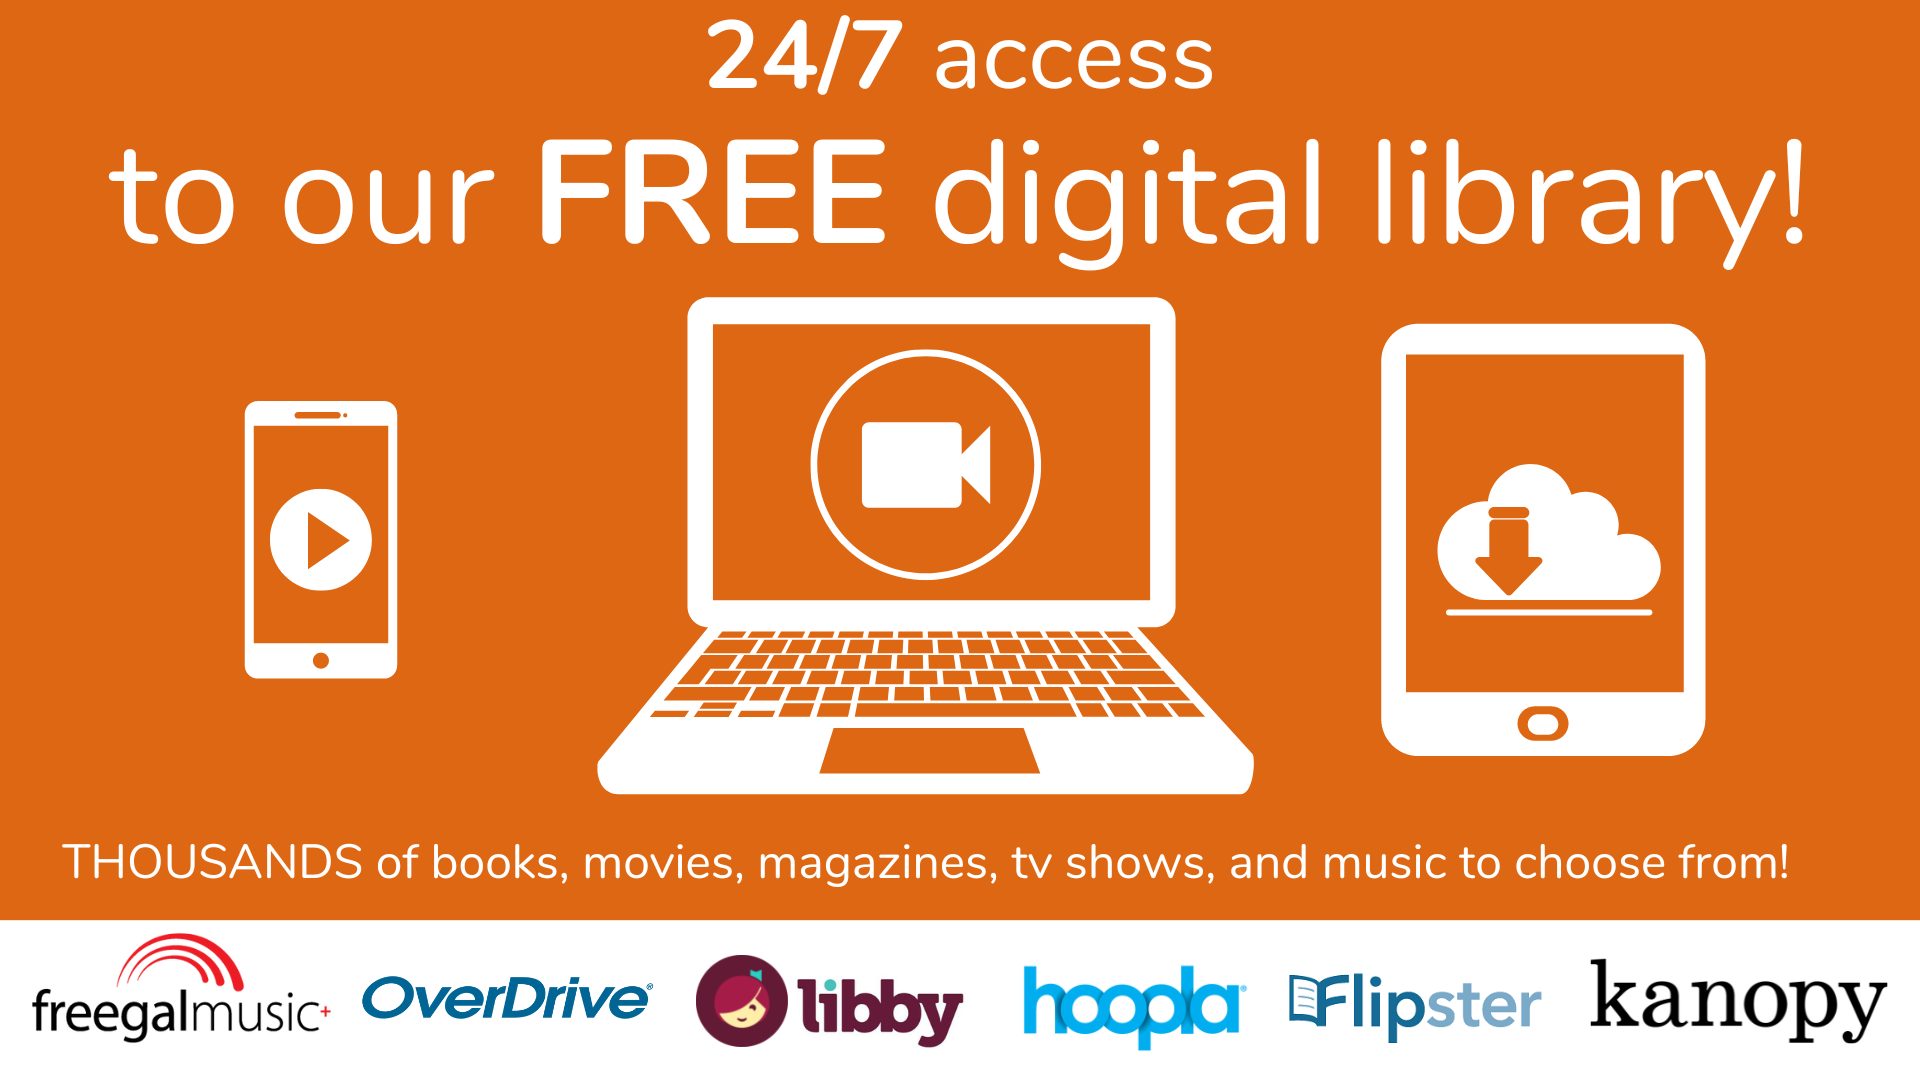 Digital content is available to check out 24-7!